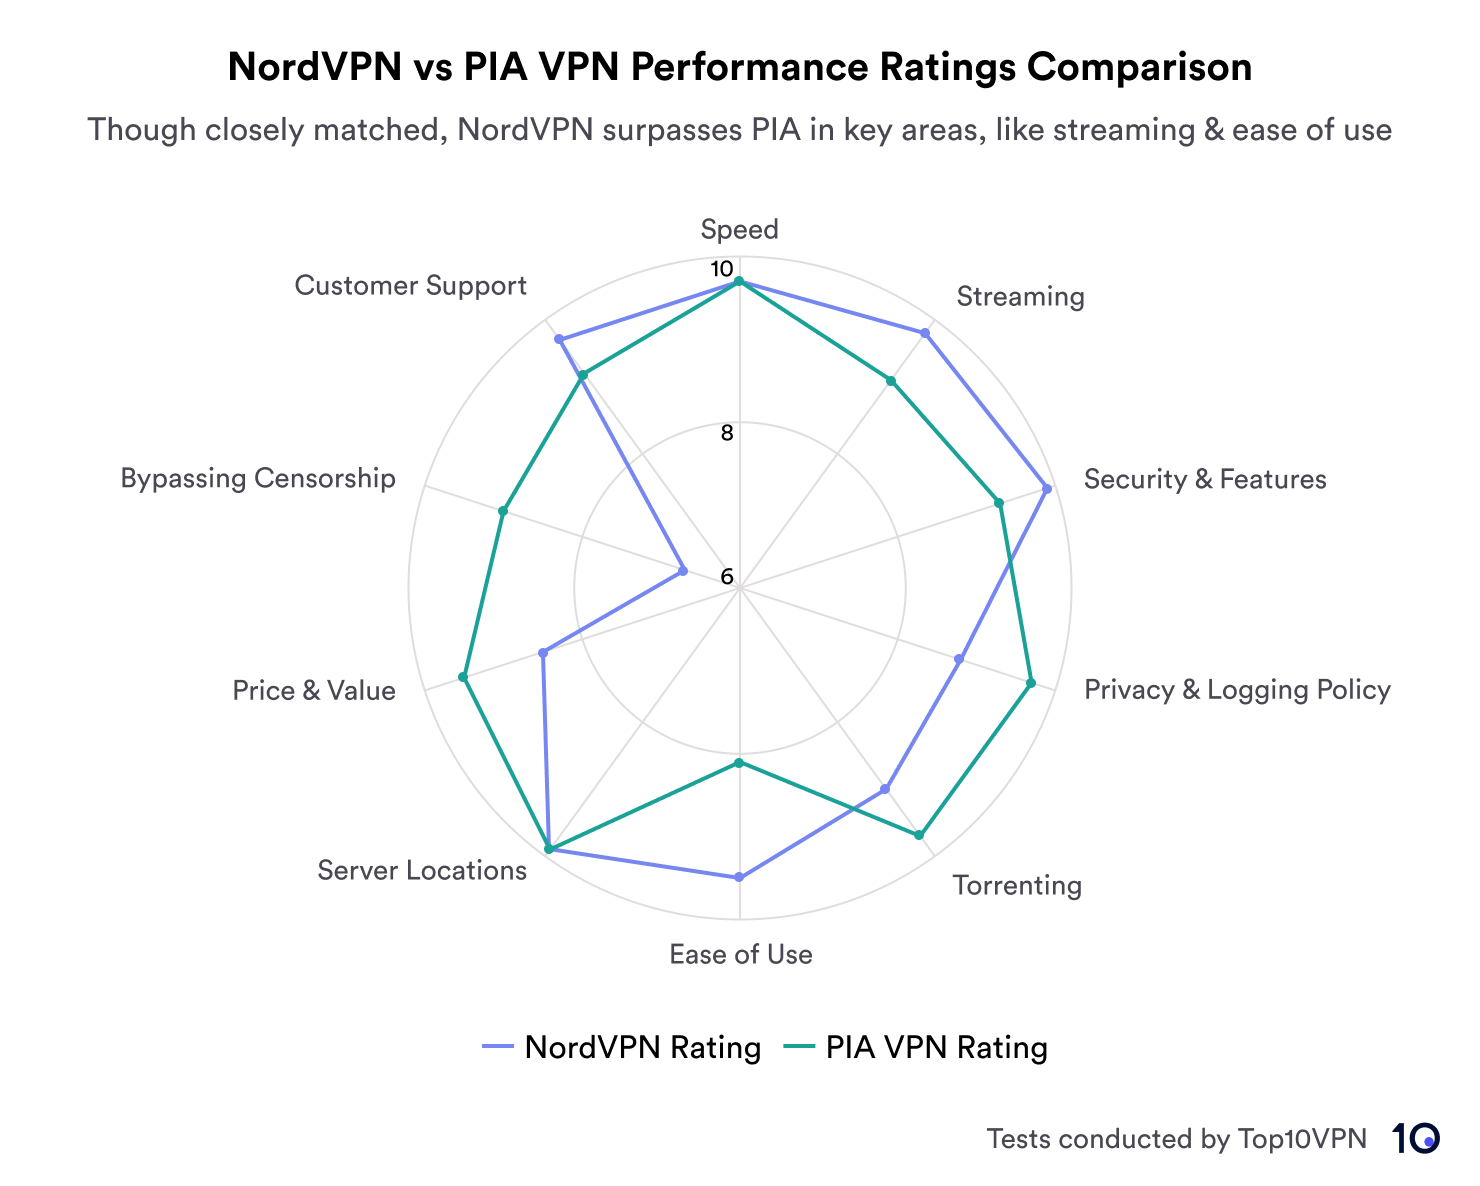 Radar chart showing the performance of NordVPN and PIA VPN across multiple categories